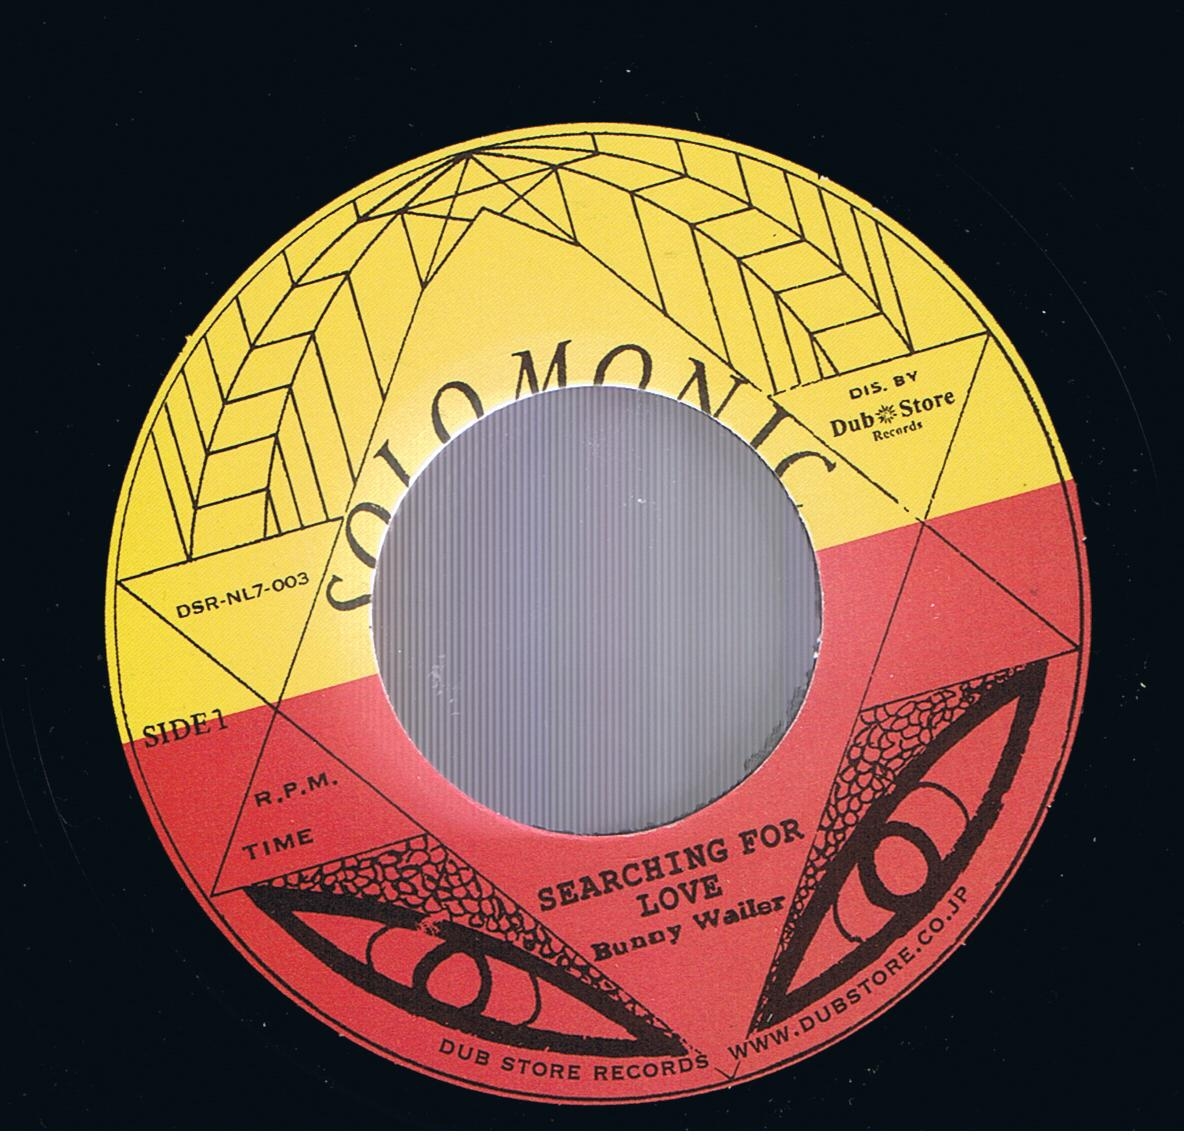 Bunny Wailer - Searching For Love / Tuff Gong All Stars - Must Skank (7")